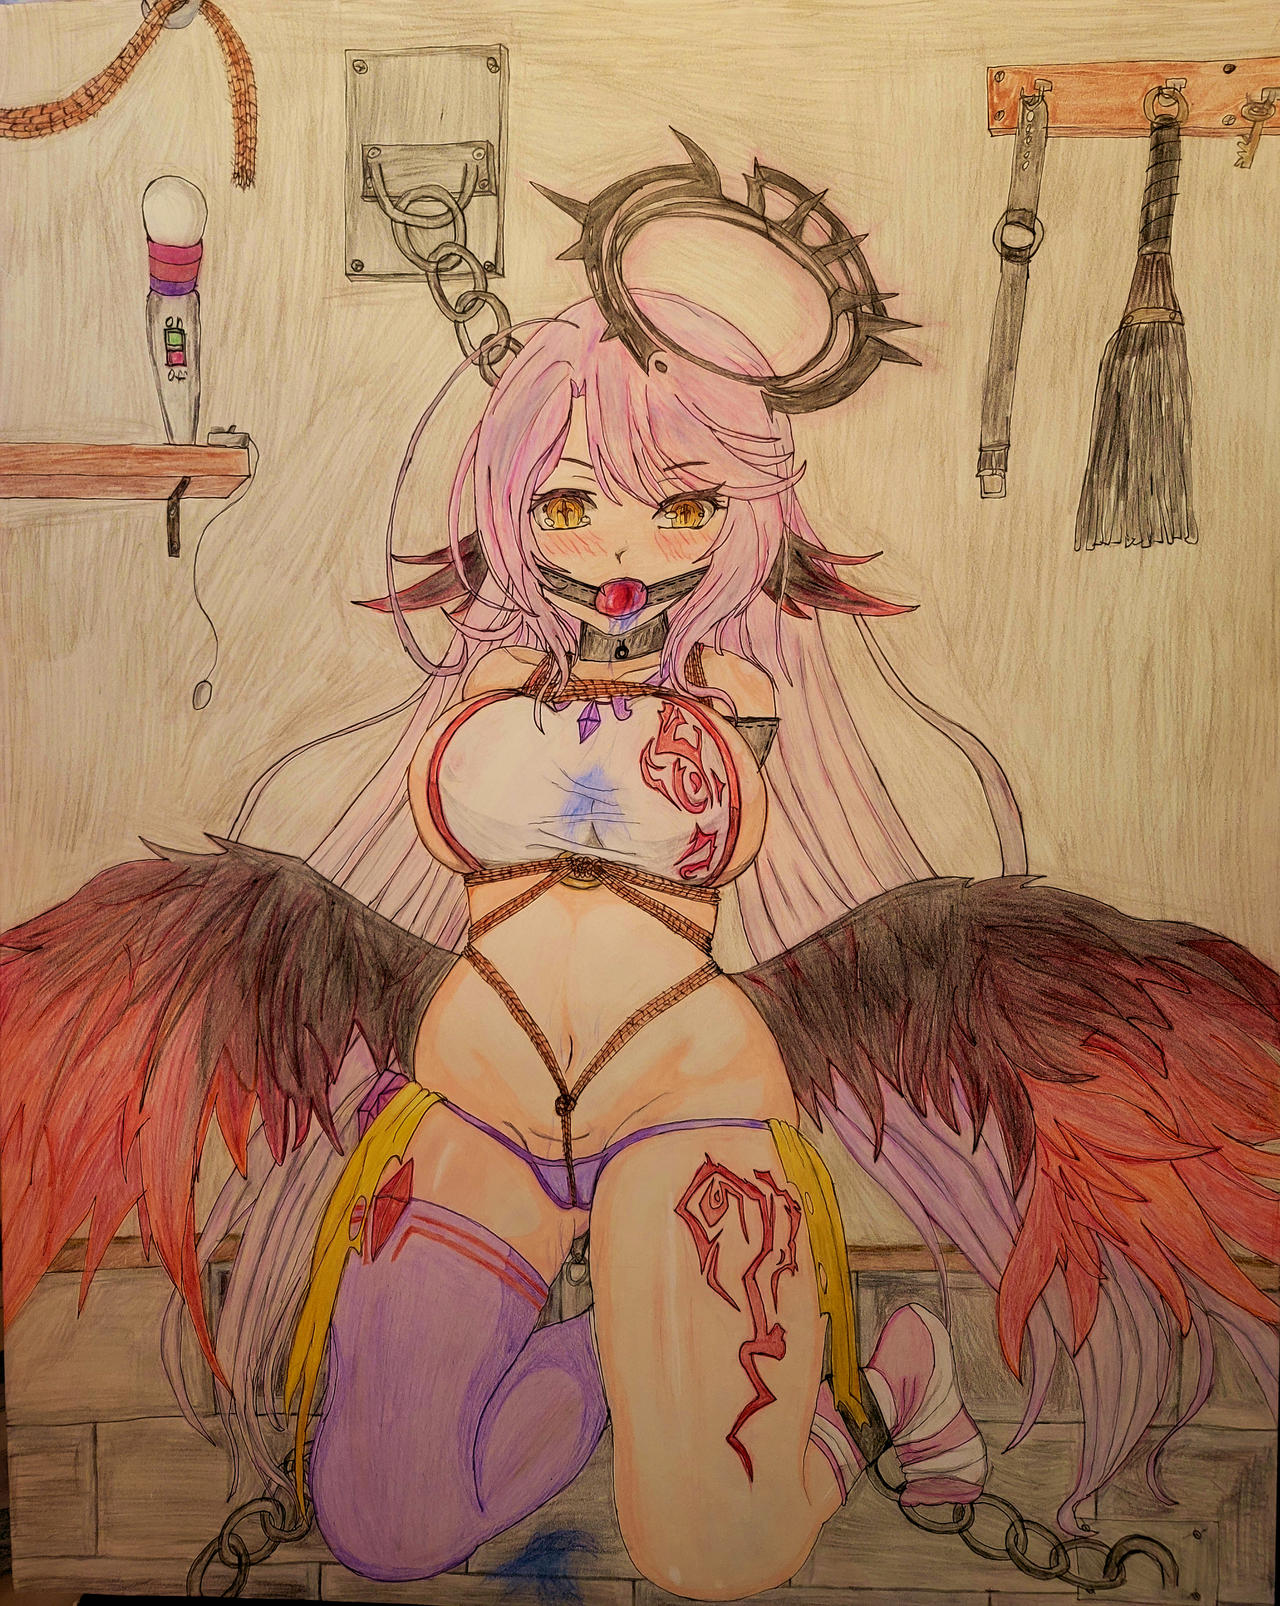 jibril_bound_and_gagged_by_amazinglytantric_dezbs1f-fullview.jpg